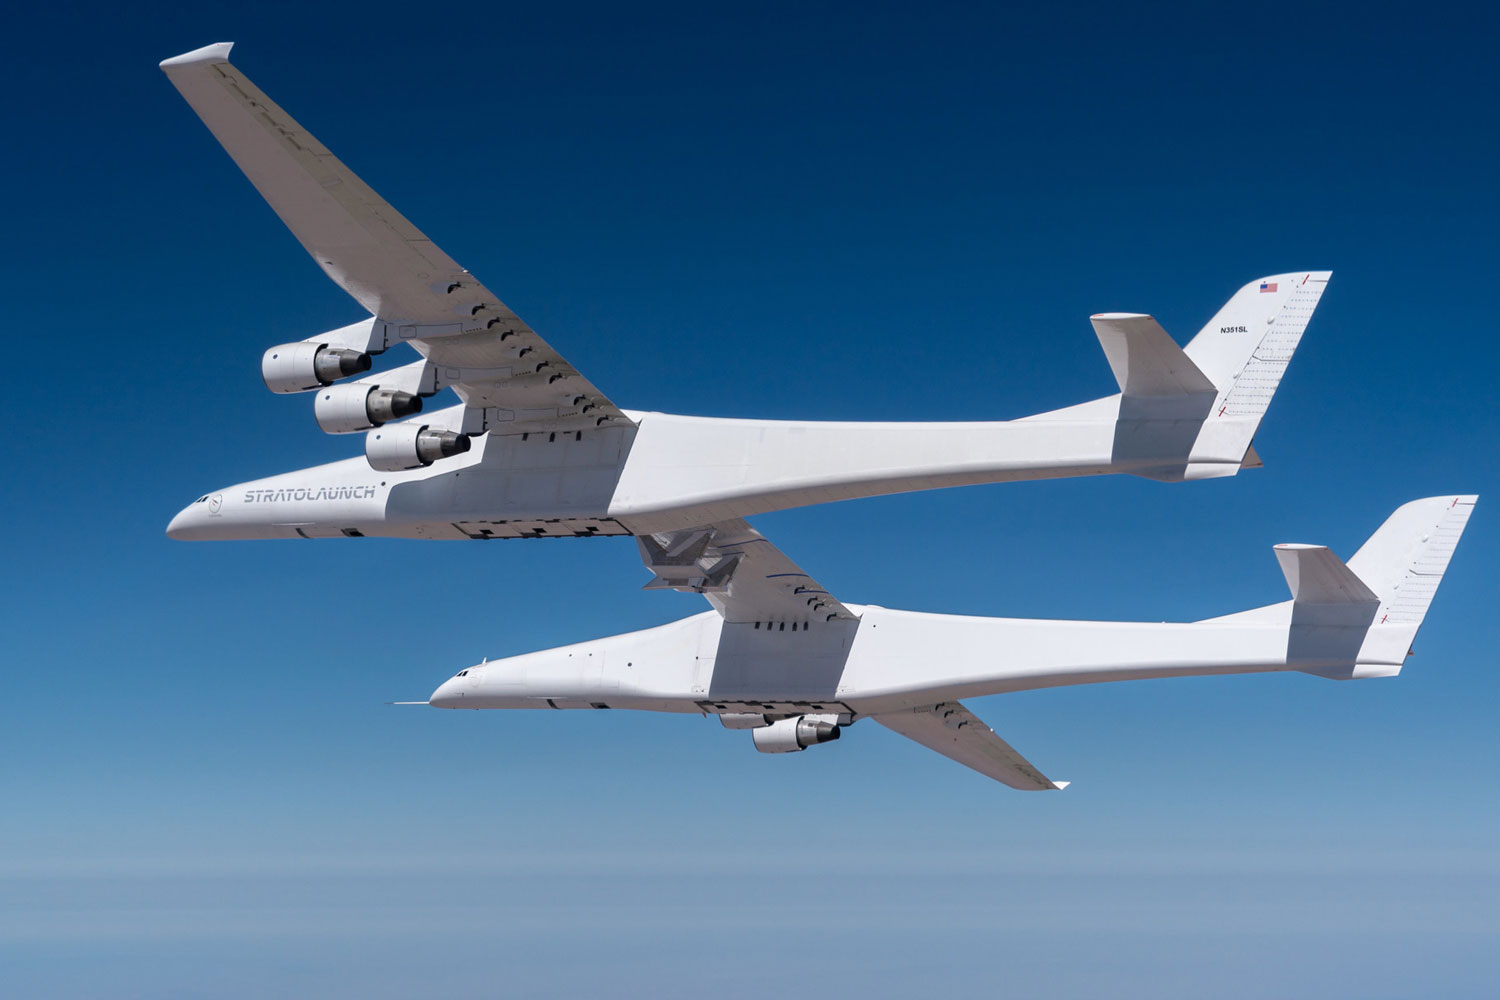 Current largest aircraft in the world, Stratolaunch Roc performs 5th flight  - Air Data News